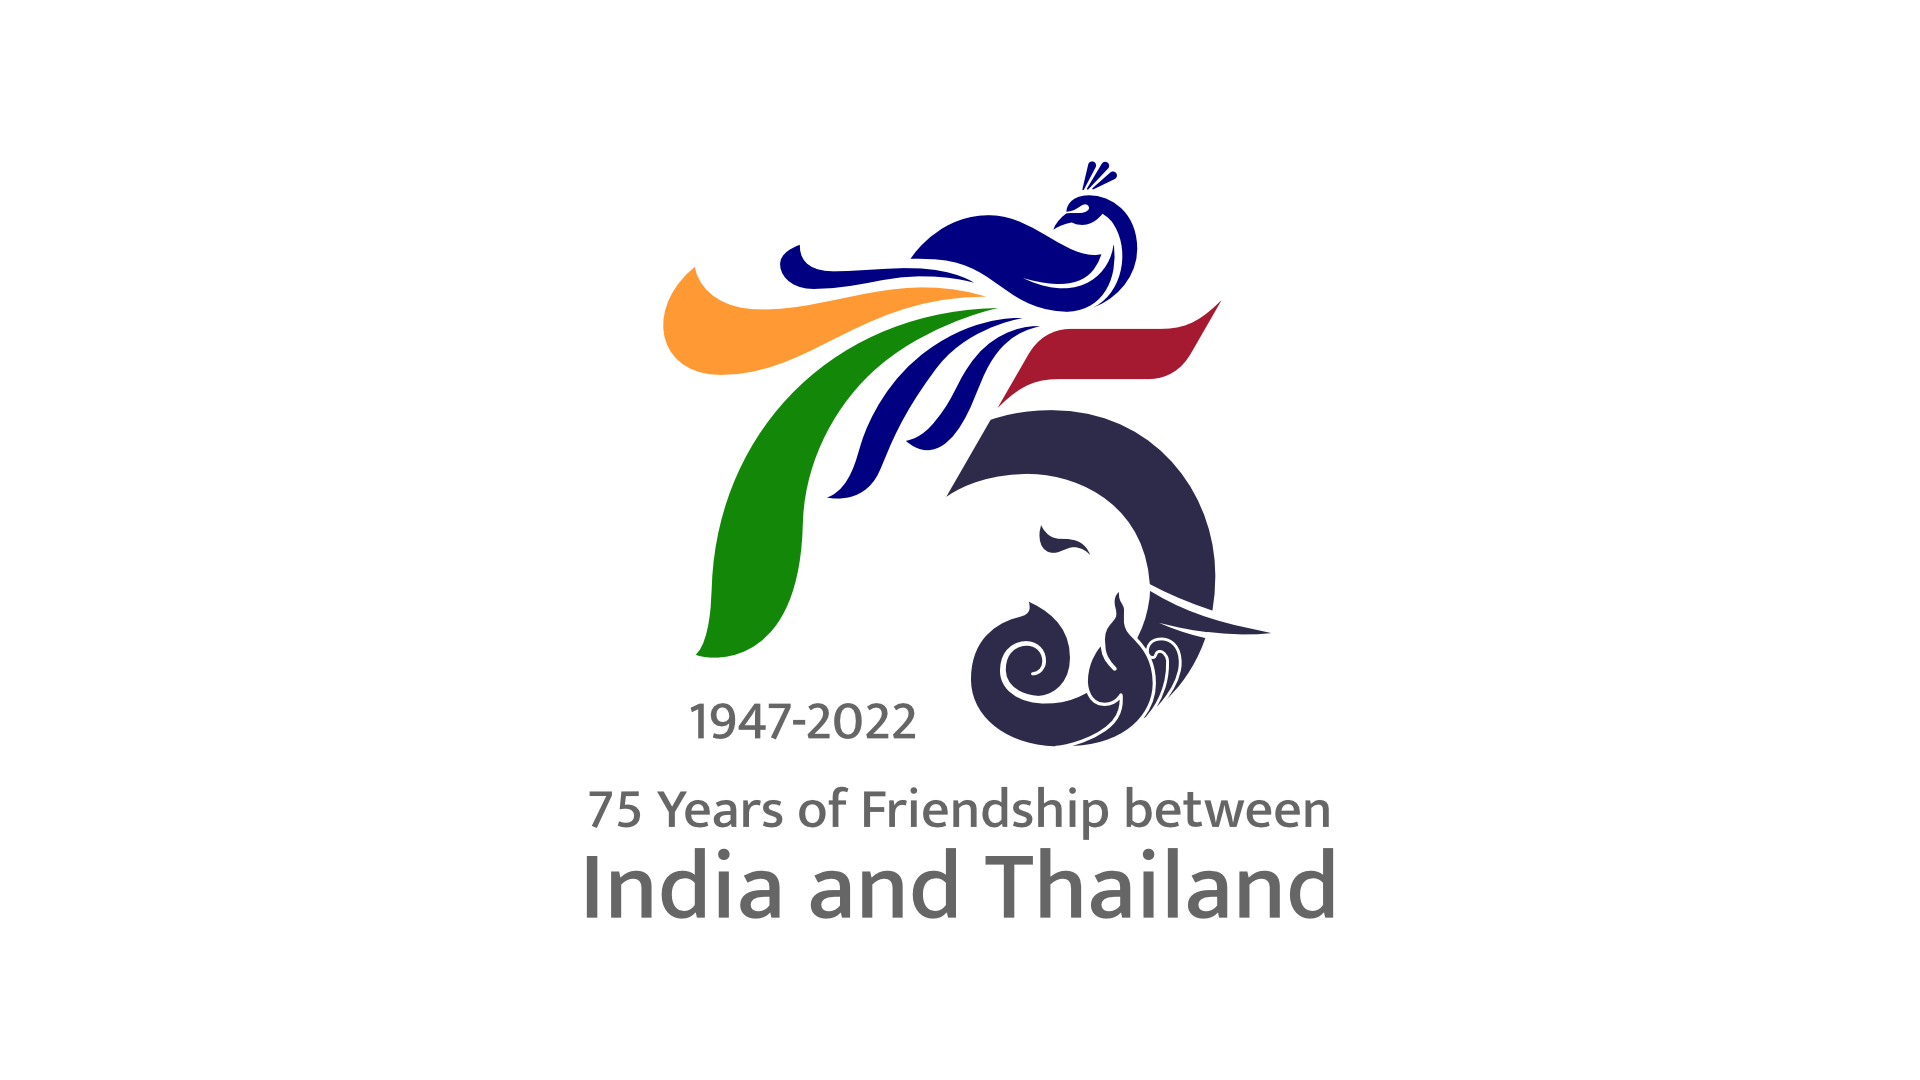 75 years of India and Thailand Diplomatic Relations. Creating a logo for this one was quite challenging at the same time exciting.
The logo contains 2 main elements which are the national symbols of the respected countries. The national bird of India which is a peacock and the national animal of Thailand which is the Elephant. Seven and Five forming the number 75 are used to subtly portray the essence and the mutual bond between the two nations. Seven is formed by the peacock and the Elephant takes the shape of figure Five. The amalgamation of these two illustrations symbolizes the 75 years of friendship between the two countries.The colours used are inspired from the National flags of the countries. Overall this logo is created to figuratively, symbolically and visually embed a sense of the multidimensional relationship between India and Thailand.